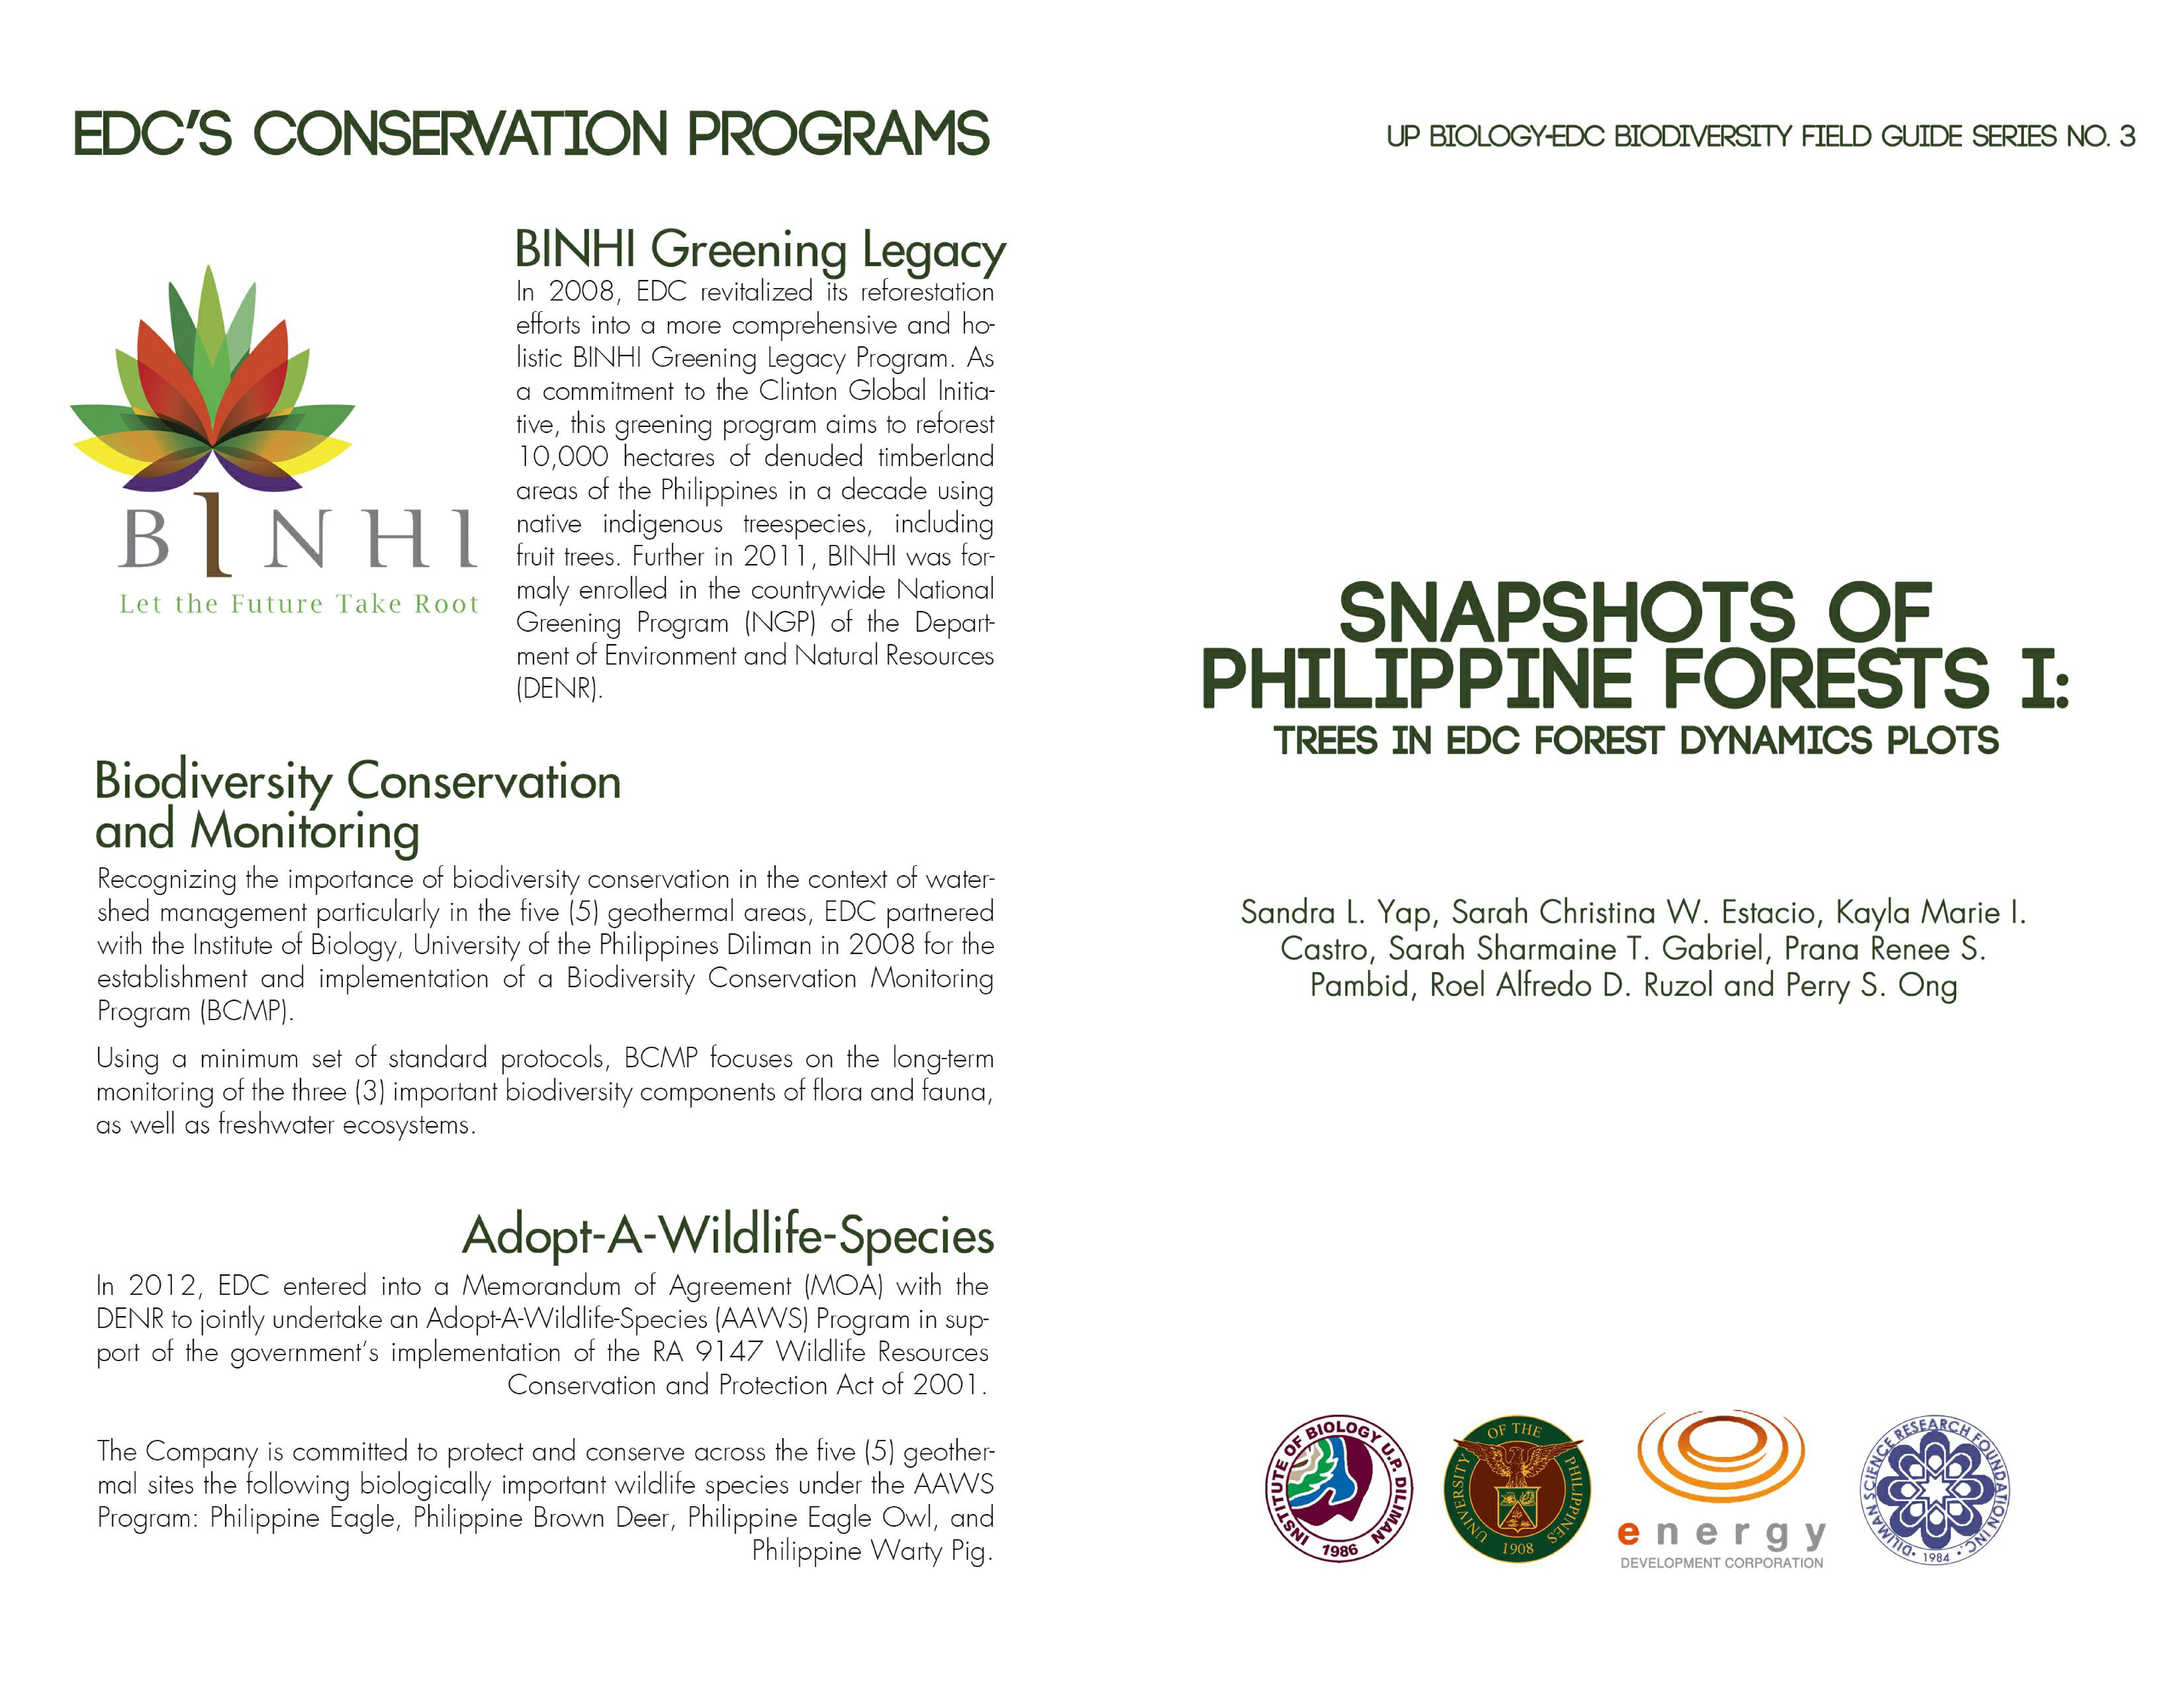 Copy of 2013 Snapshot of Philippine Forests - Trees in EDC Forest Dynamics Plot-03